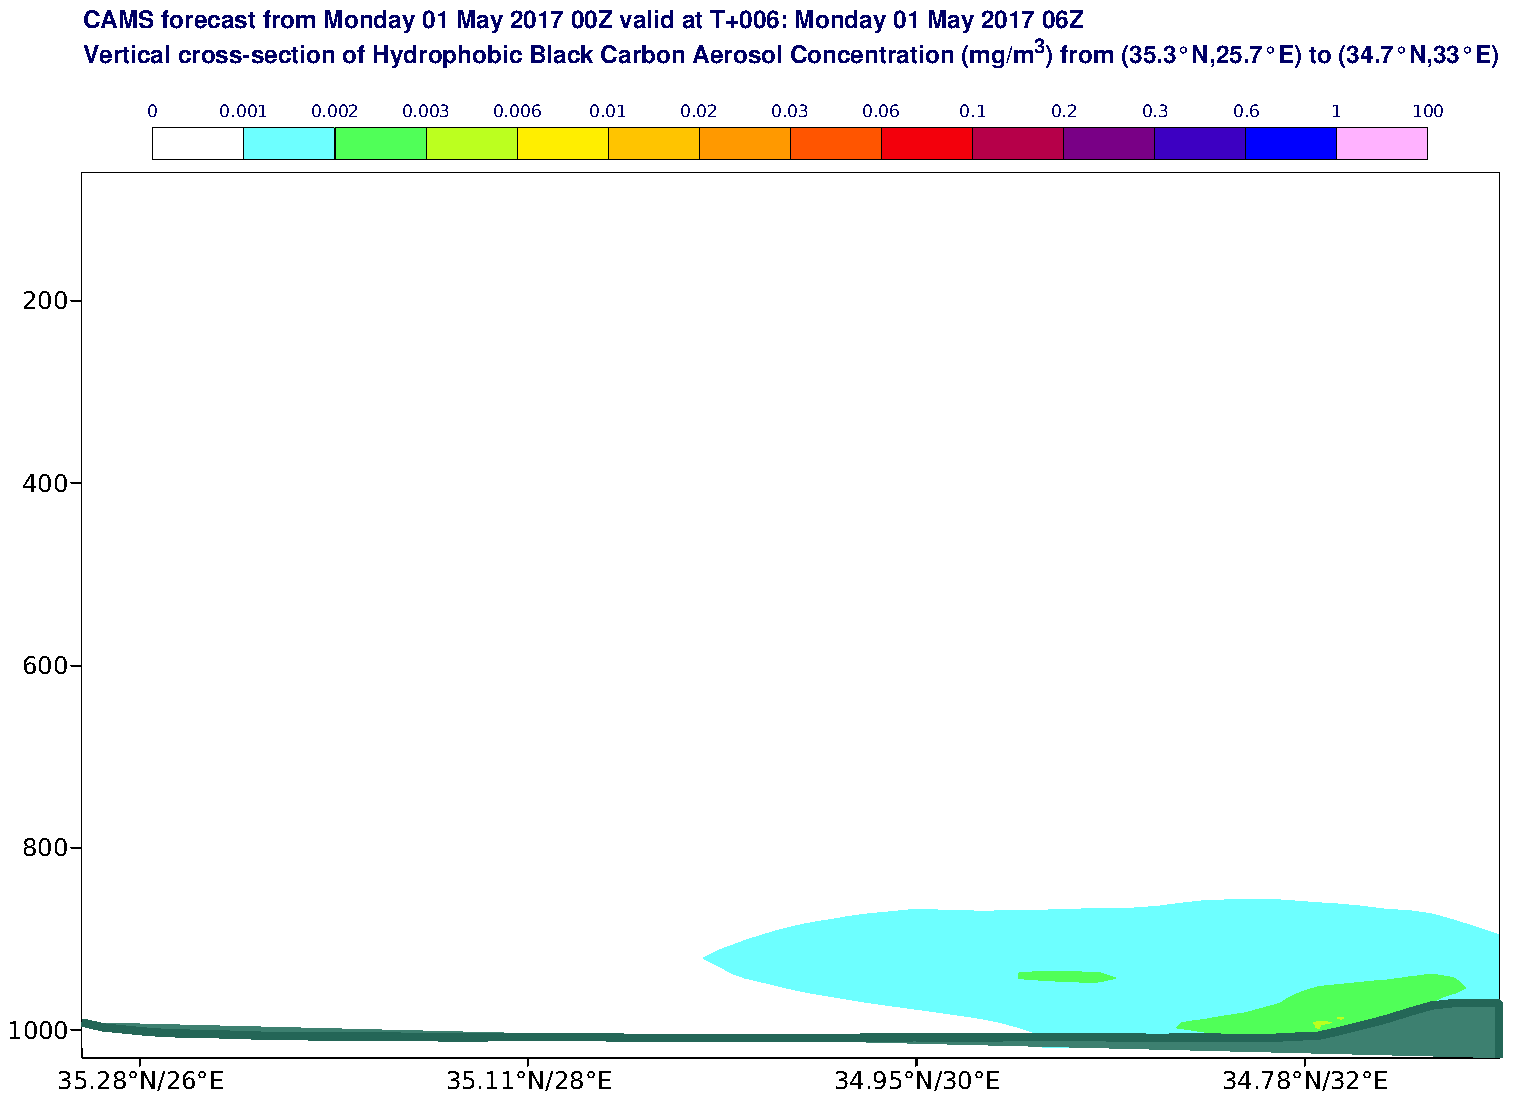 Vertical cross-section of Hydrophobic Black Carbon Aerosol Concentration (mg/m3) valid at T6 - 2017-05-01 06:00